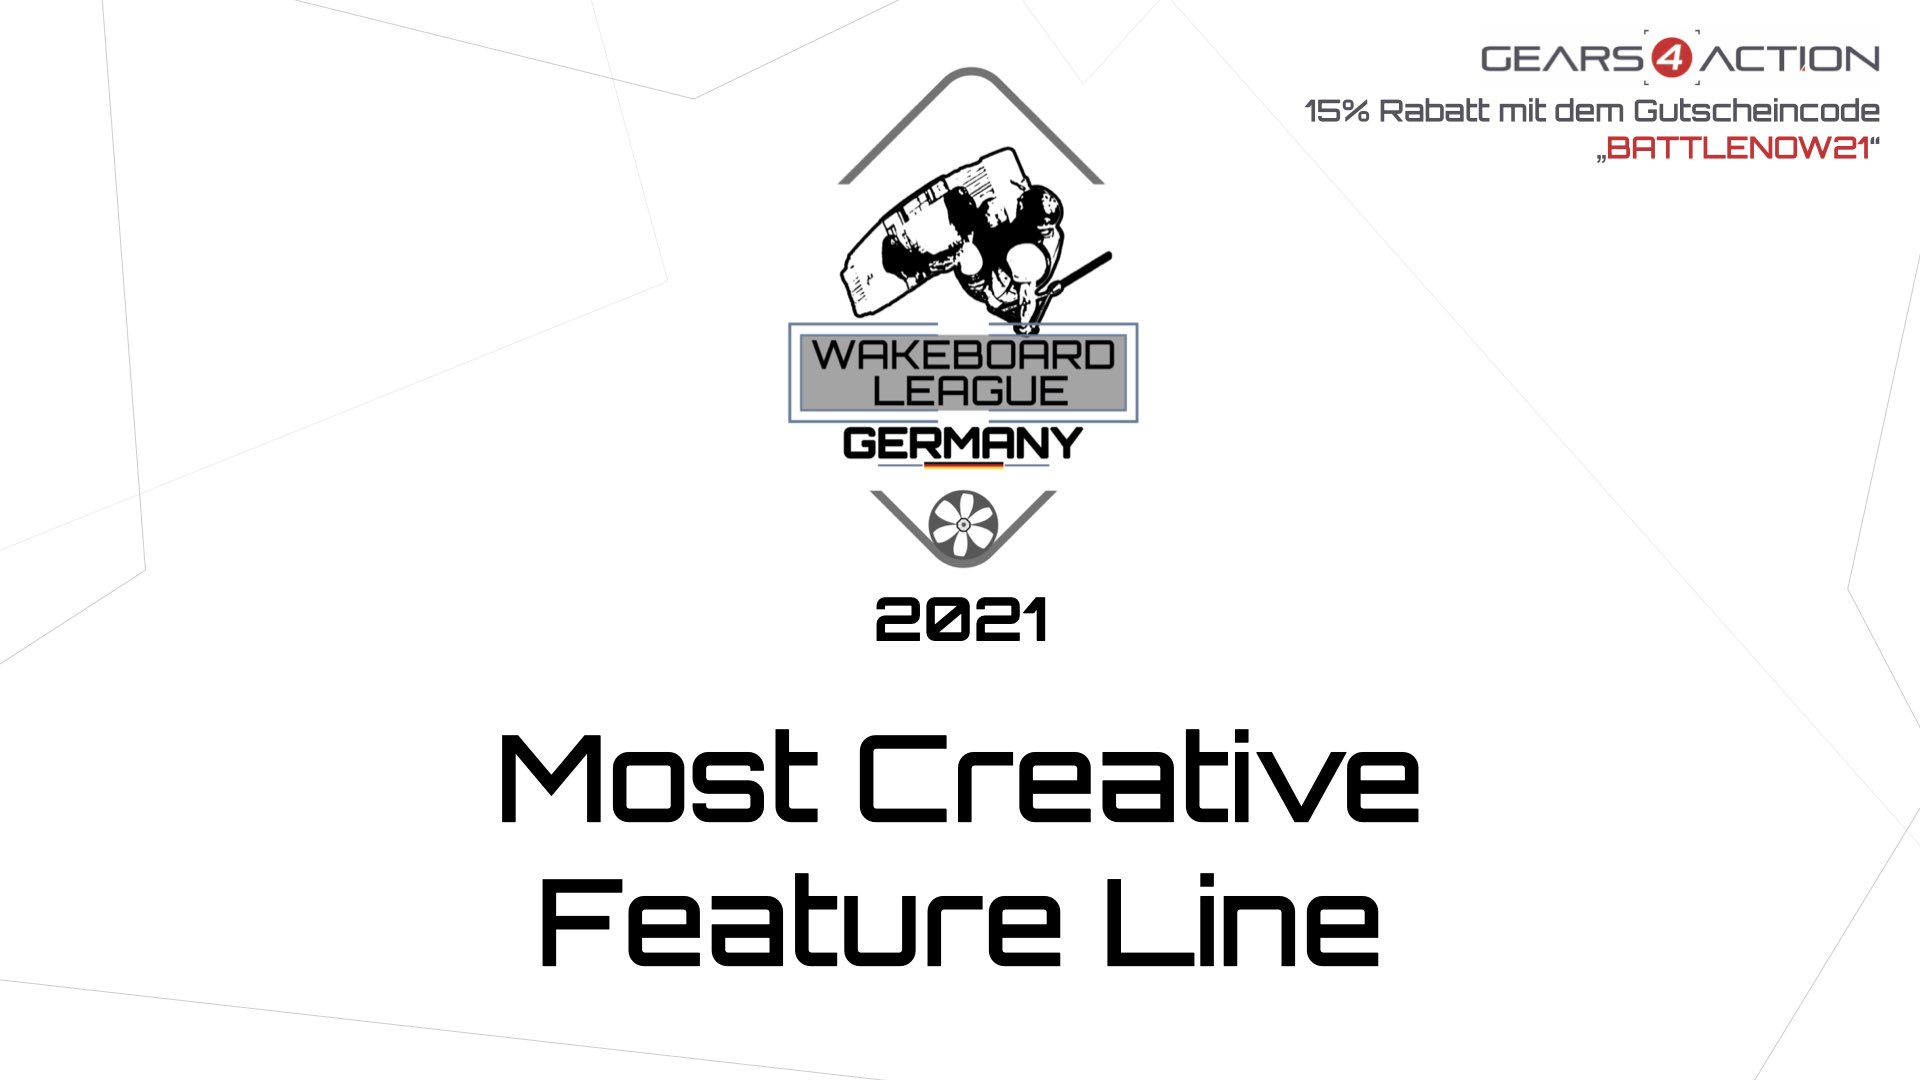 Wakeboard League Germany 2021 - #7 Most Creative Feature Line